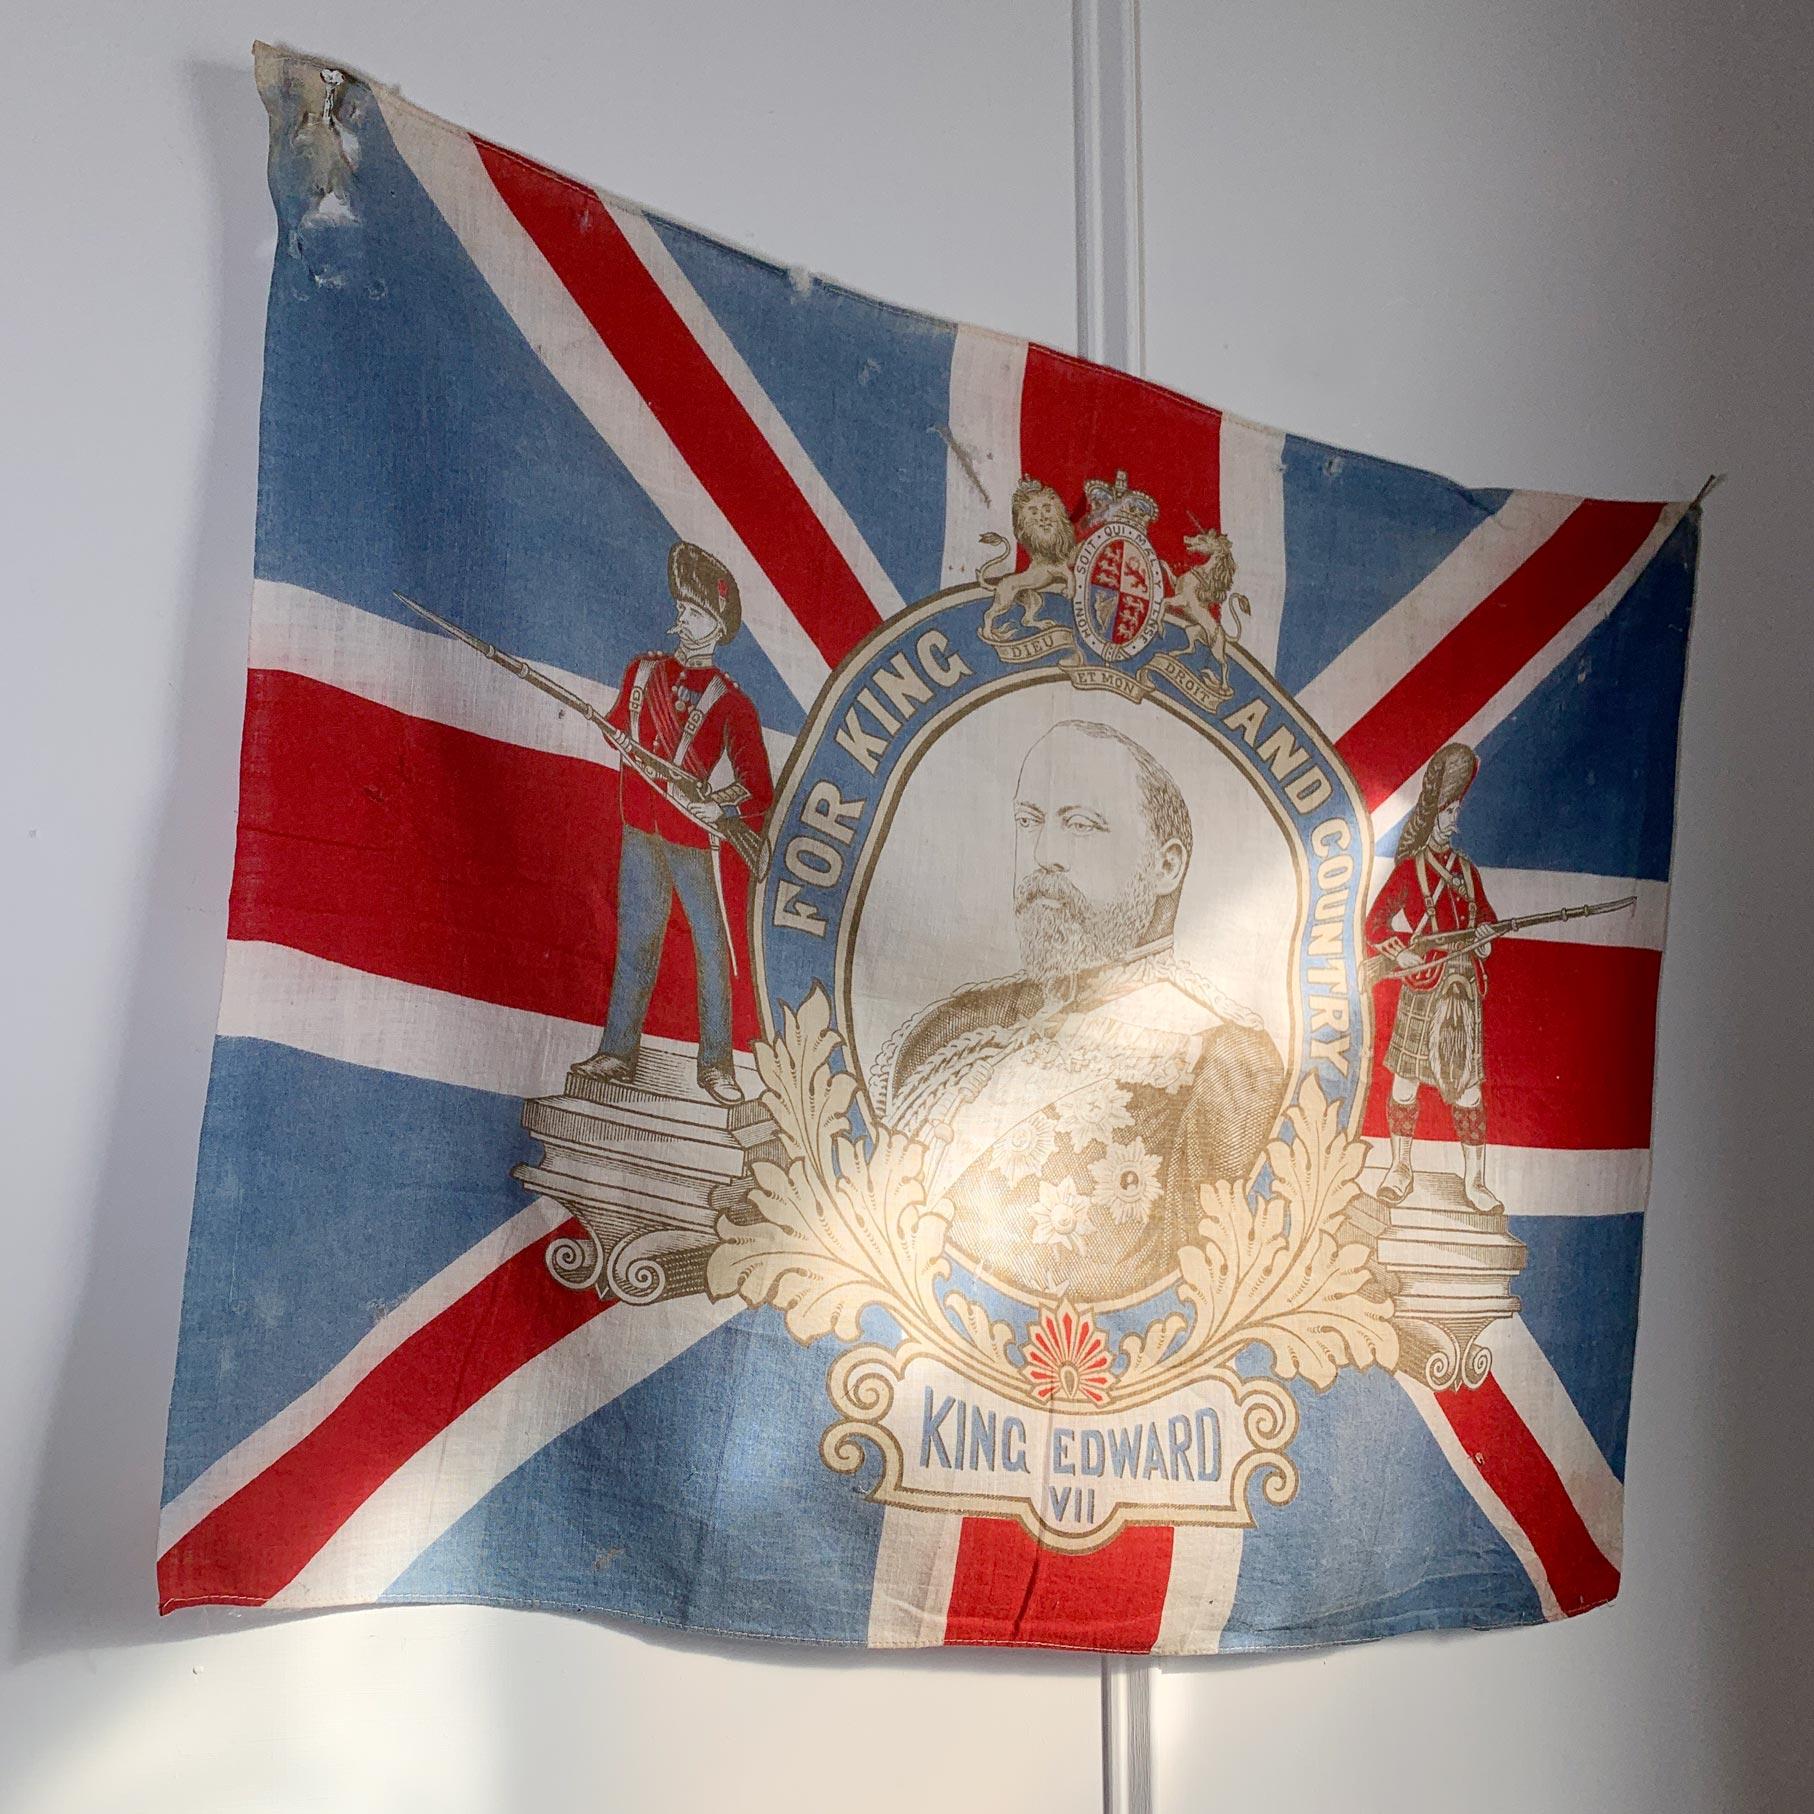 British Royal Family

A rare and Historical Royal Coronation flag from The Coronation Of HRH King Edward VII, this flag was produced to commemorate the crowning of King Edward VII in 1902. 

Edward was 59 when he became King on 22 January 1901,